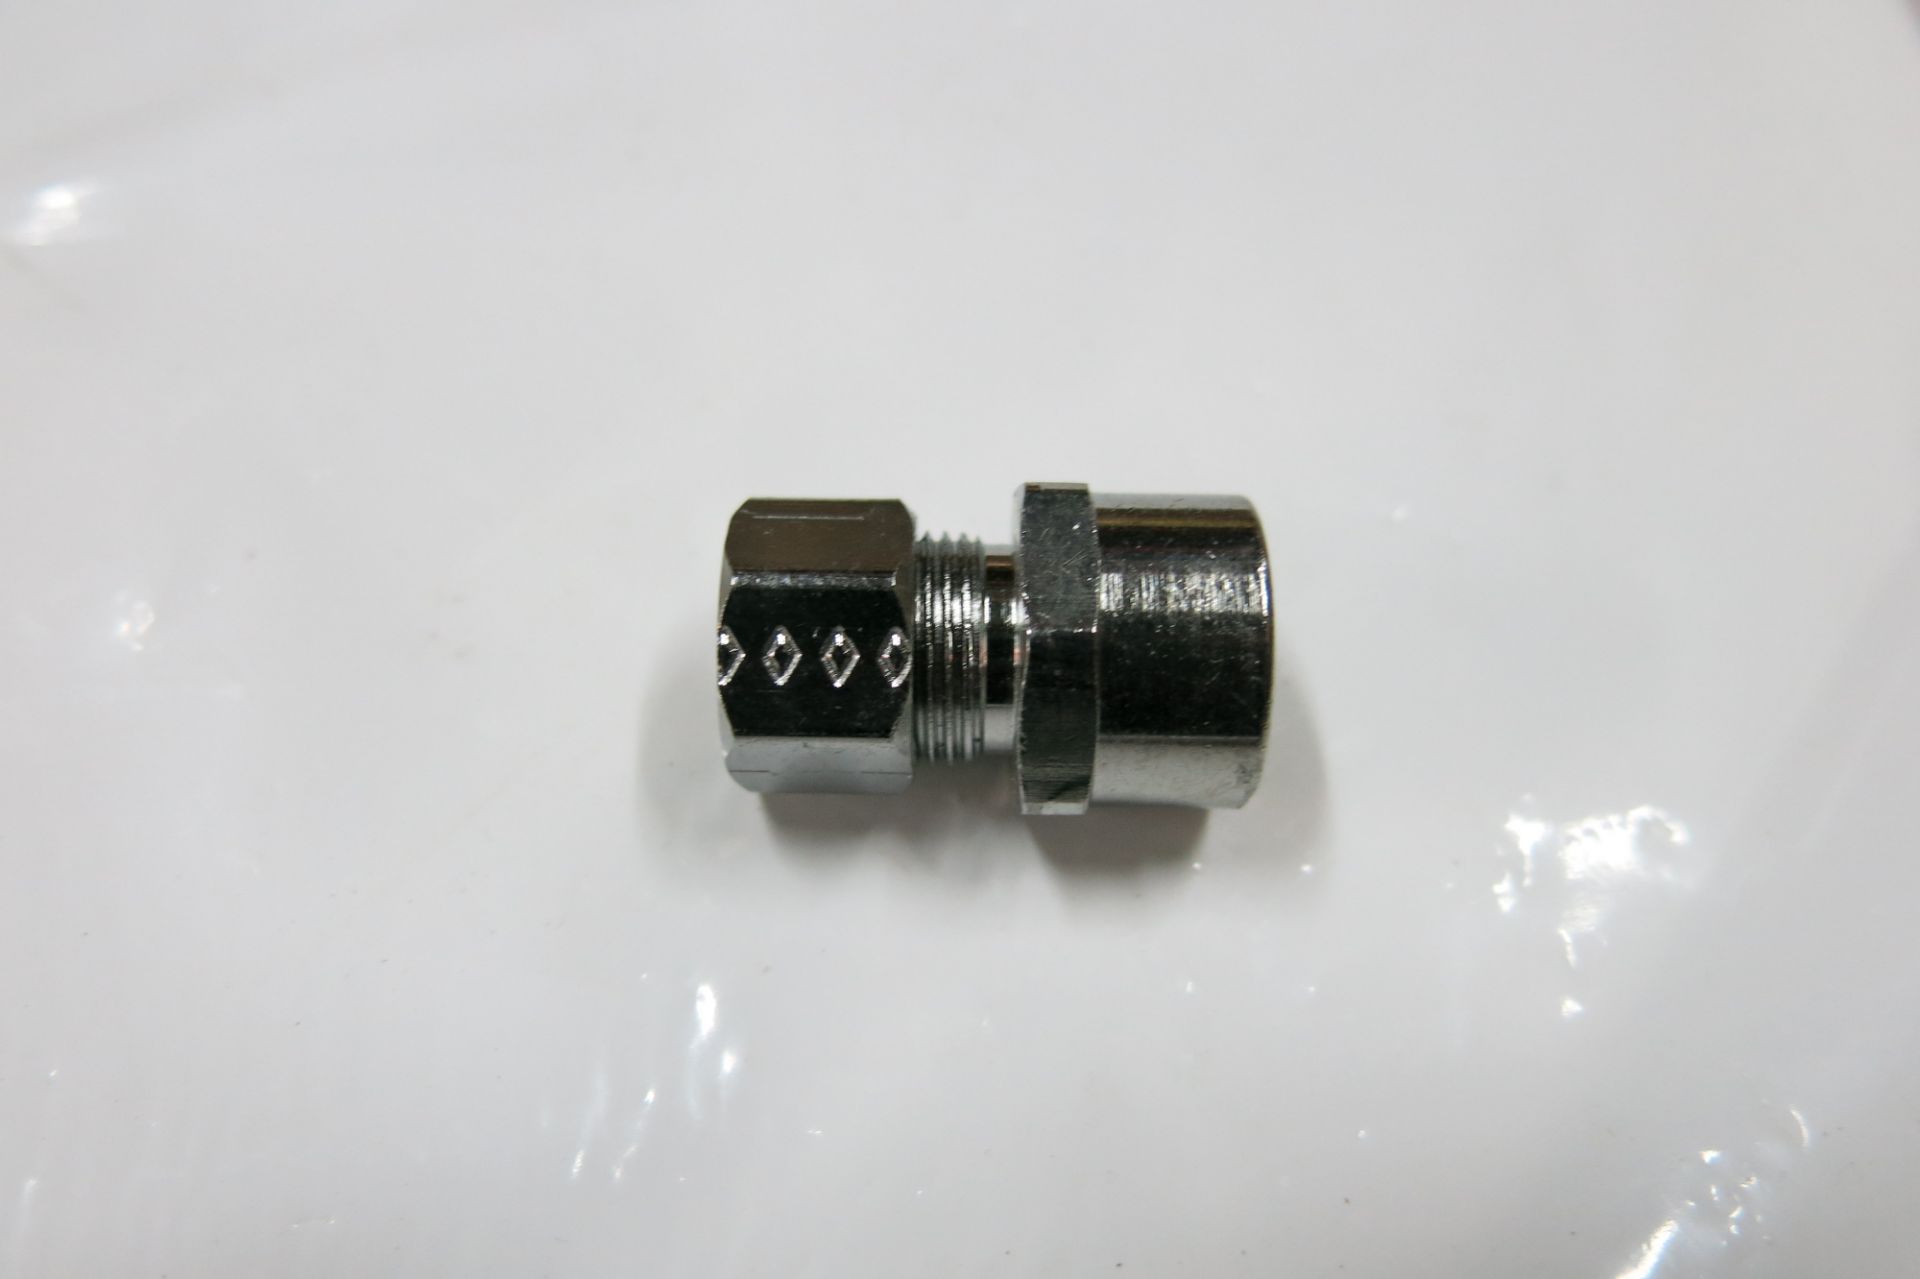 LOT OF 1/2" COUPLINGS WITH COMPRESSION FITTING - NEW (LOCATED IN SCARBOROUGH) - Image 3 of 9